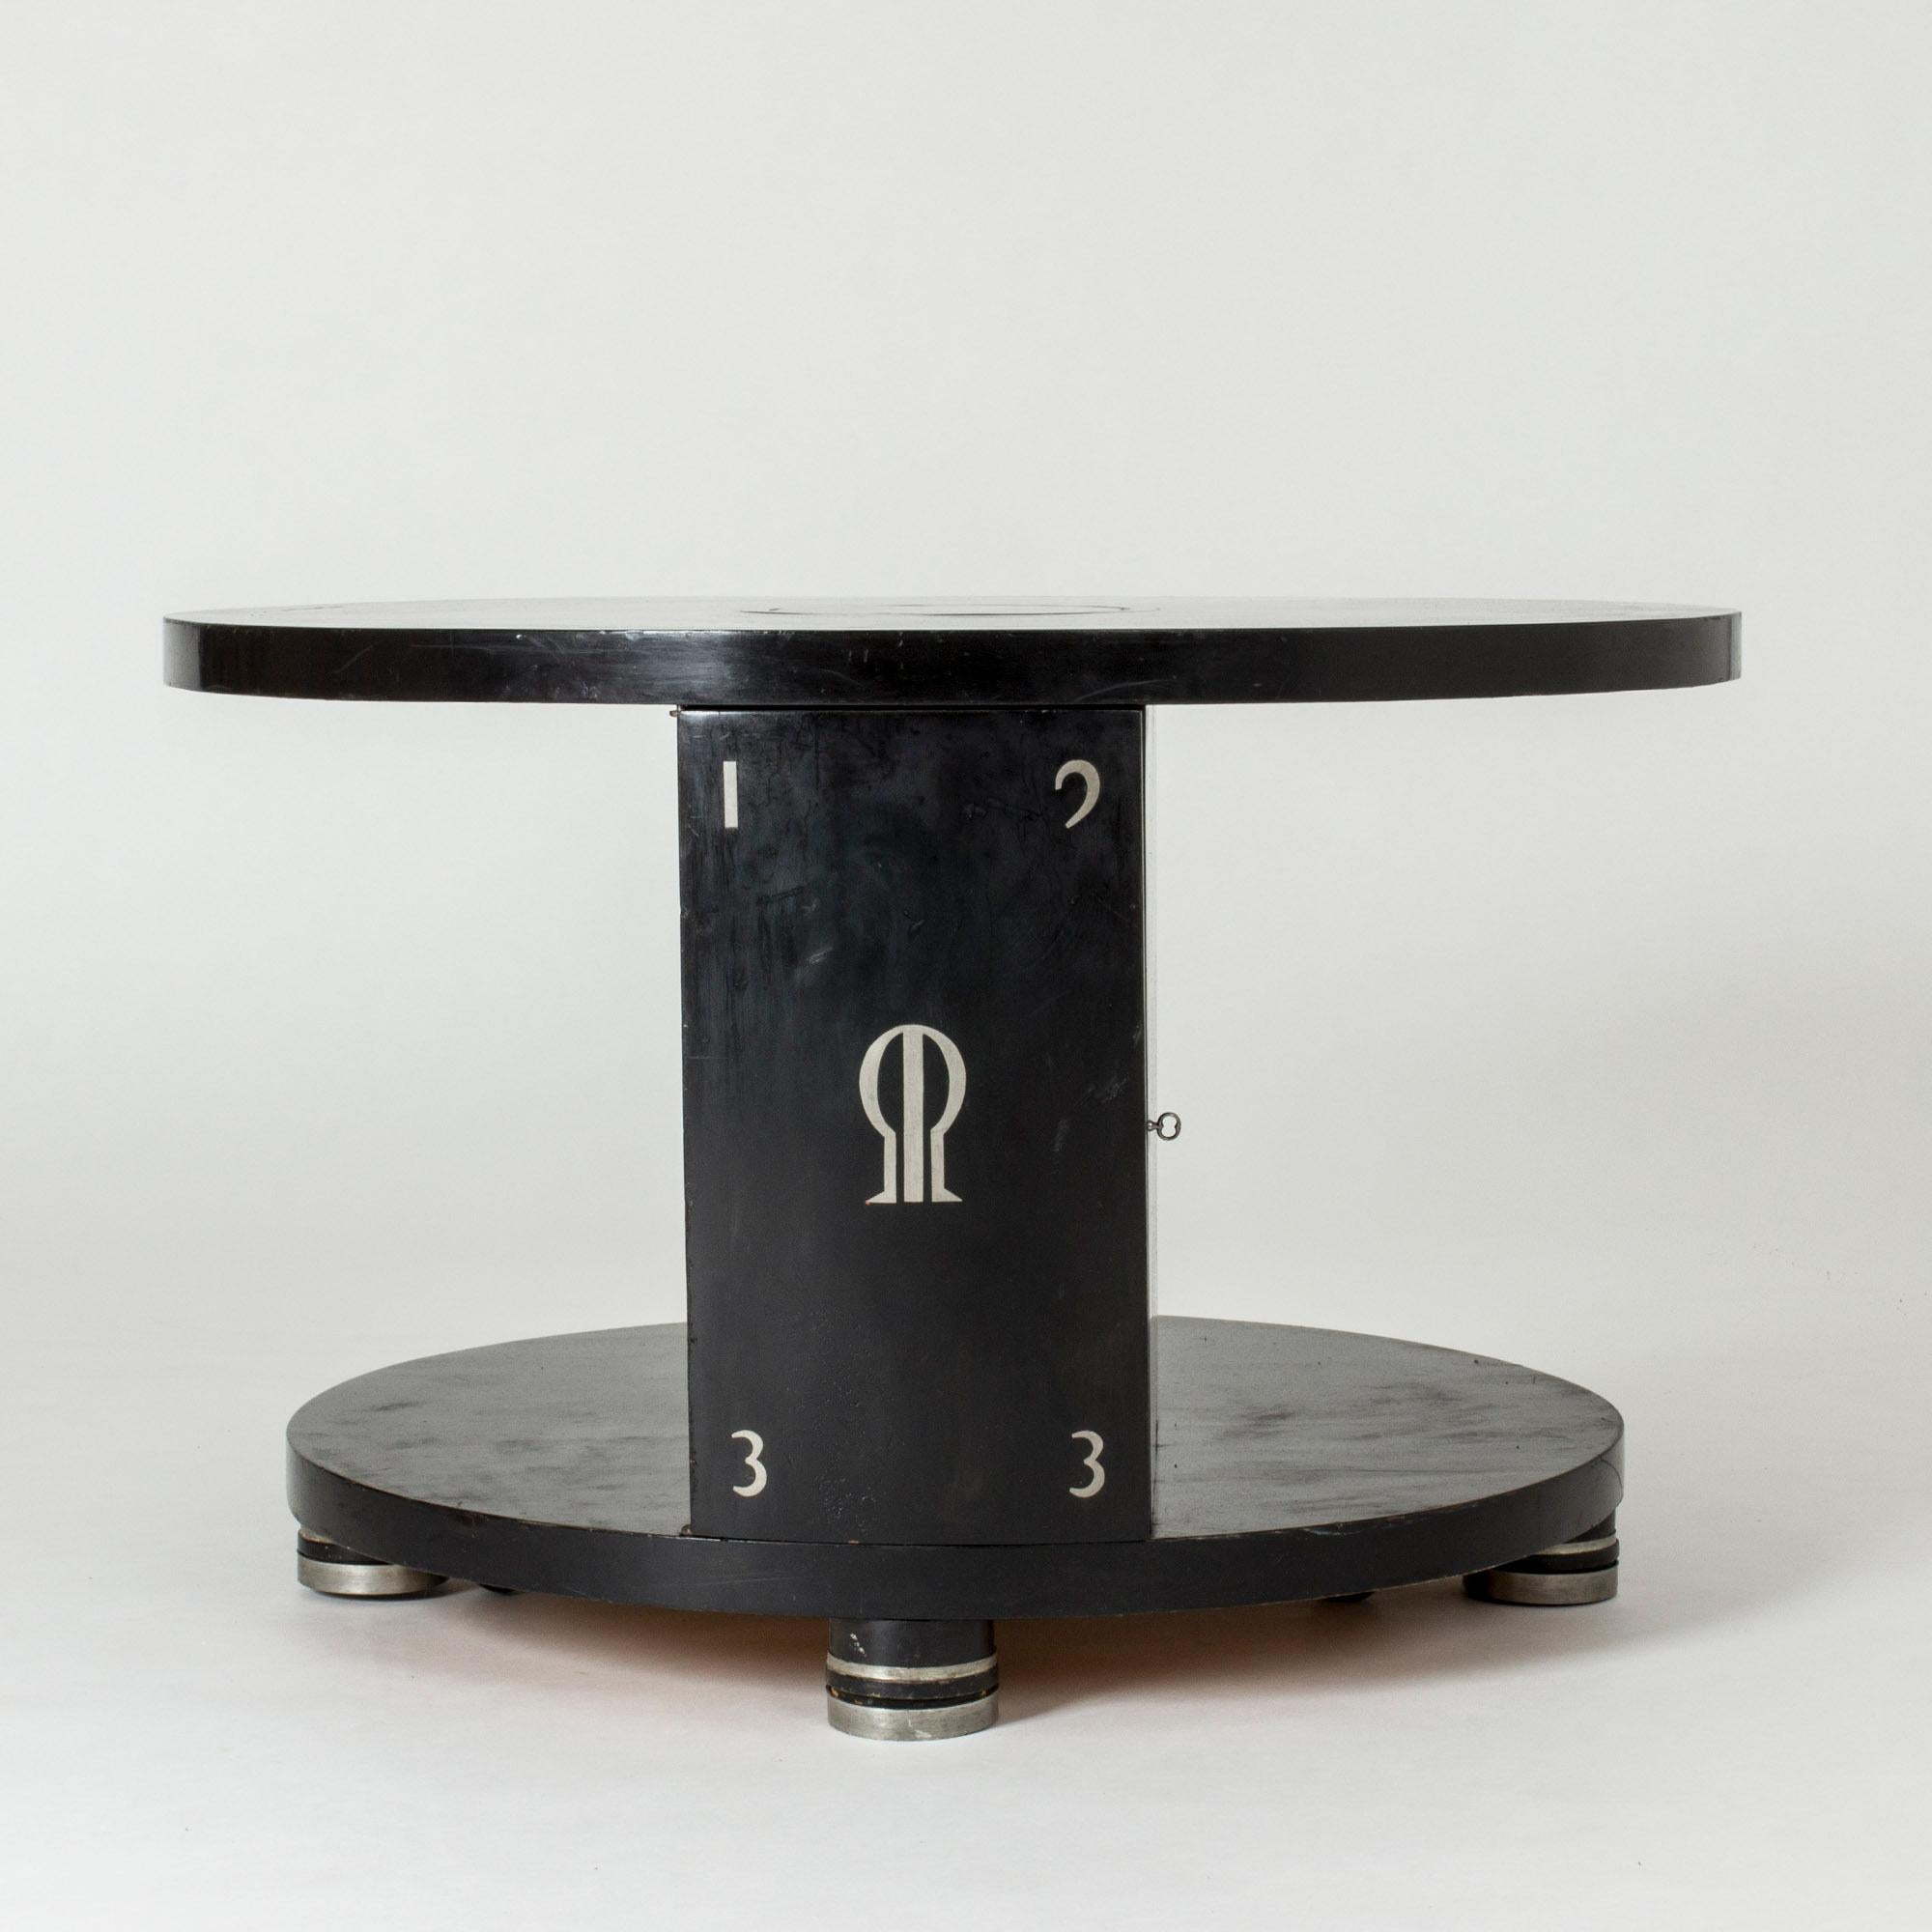 Art Deco coffee table by Alvar Andersson, made from black lacquered wood with pewter inlays and feet. Wheels allow the table to slide if it needs to be moved. A small cabinet is built into the table, with two shelves.